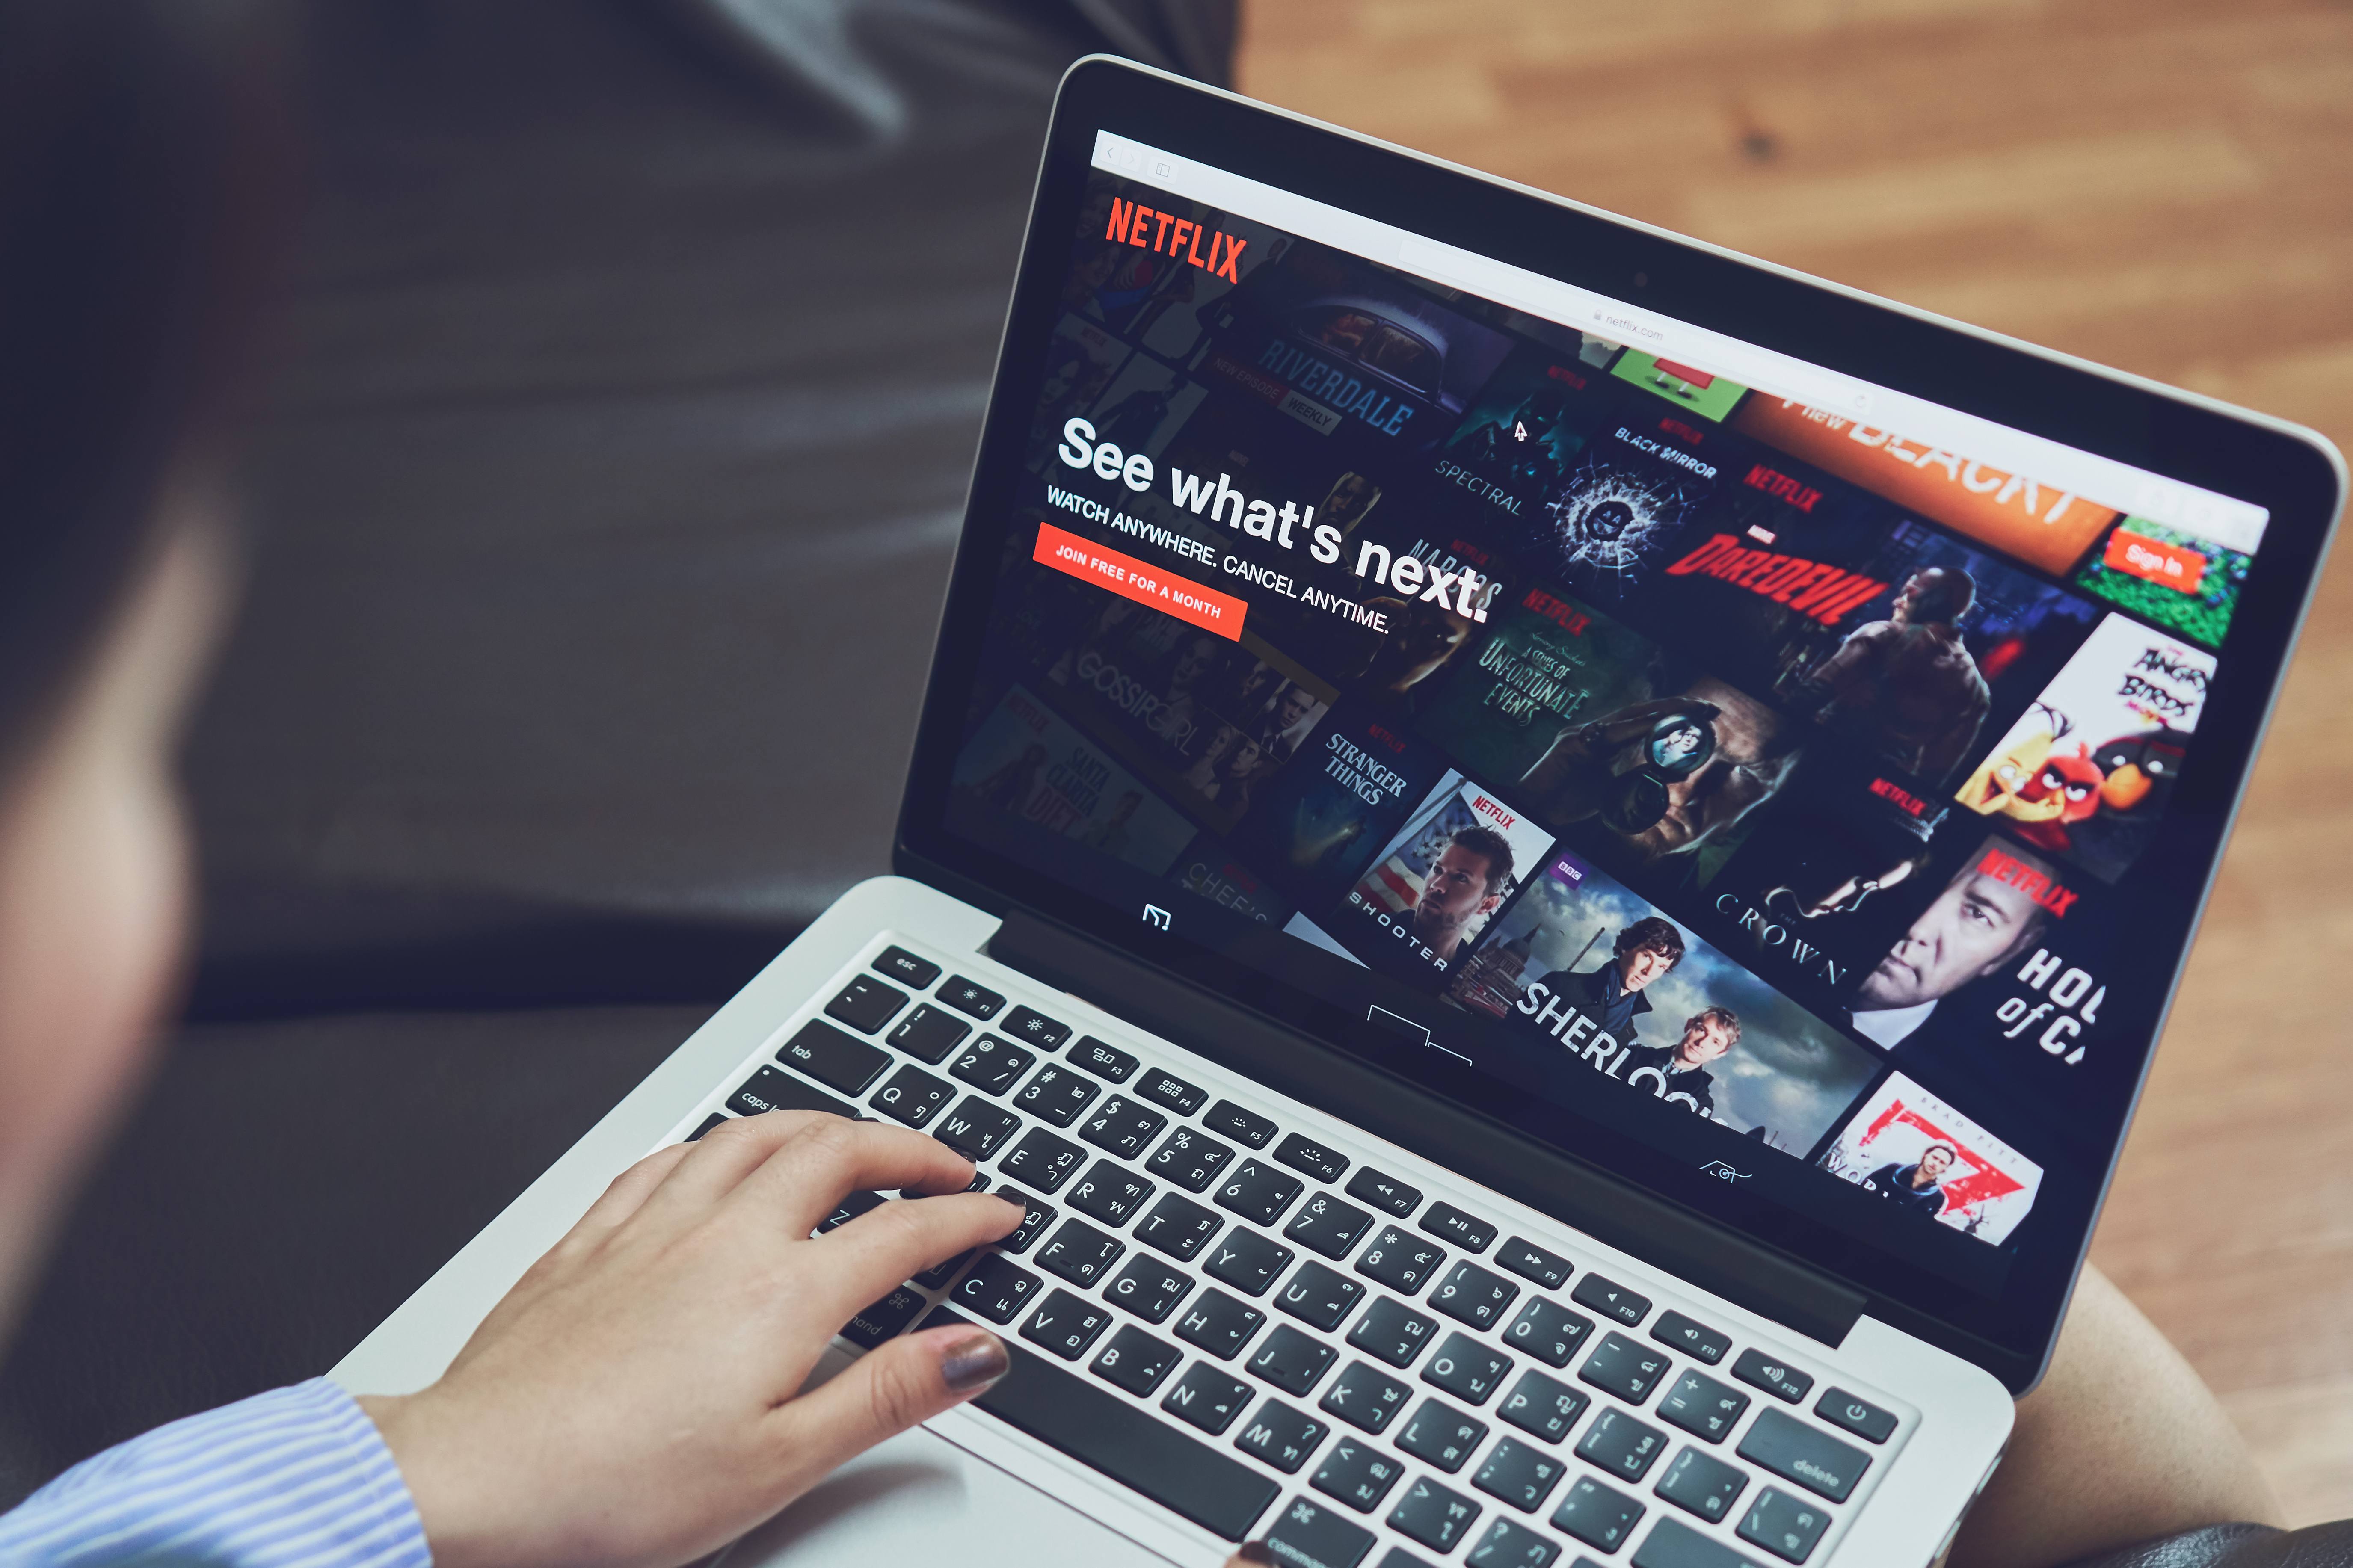 Netflix May Double its Asia Subscriber Base Thanks to Originals like ‘Squid Game’